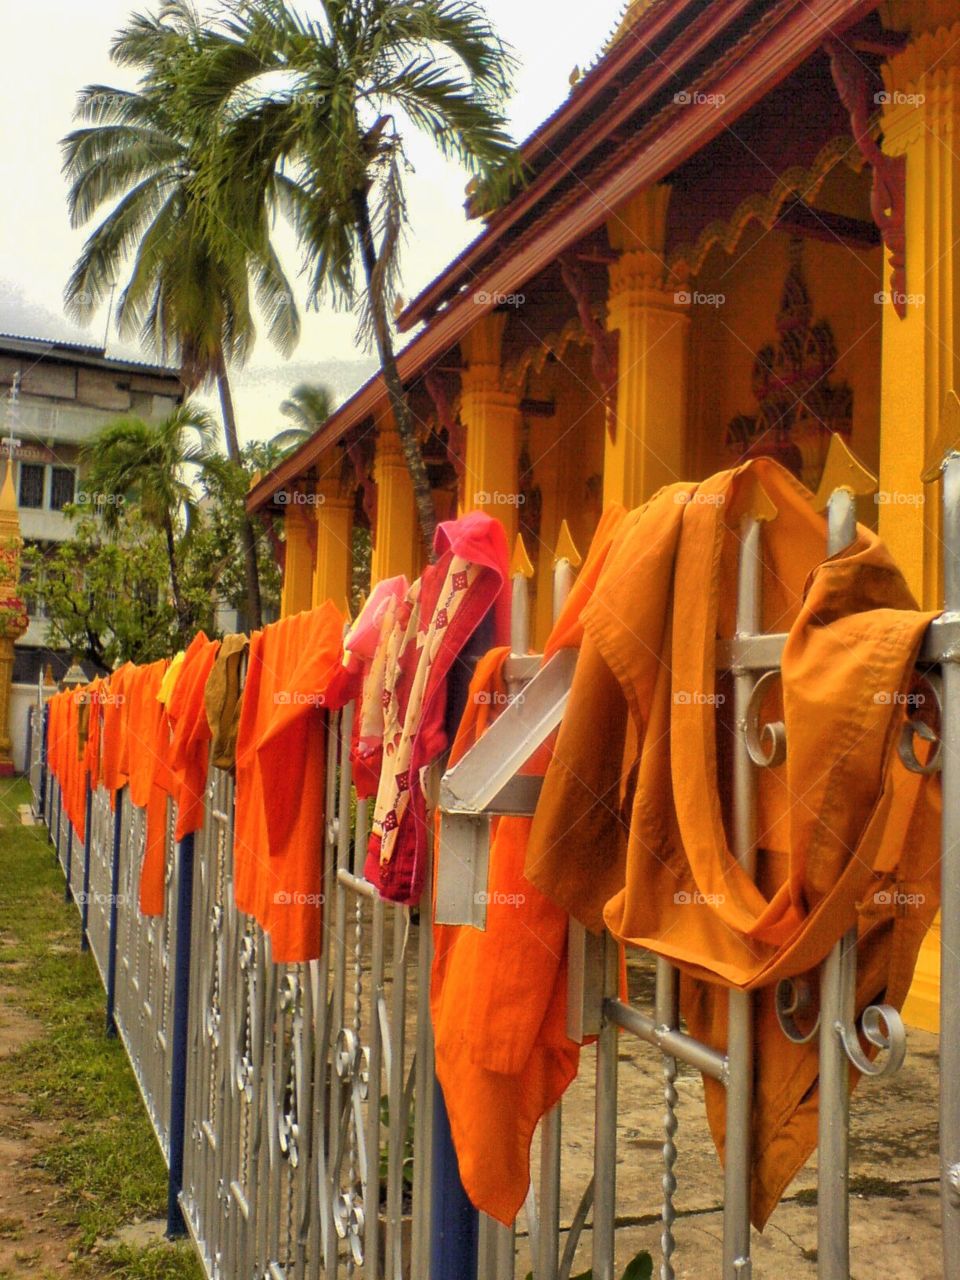 Monks' robes drying in the sun. 
Bangkok, Thailand. 